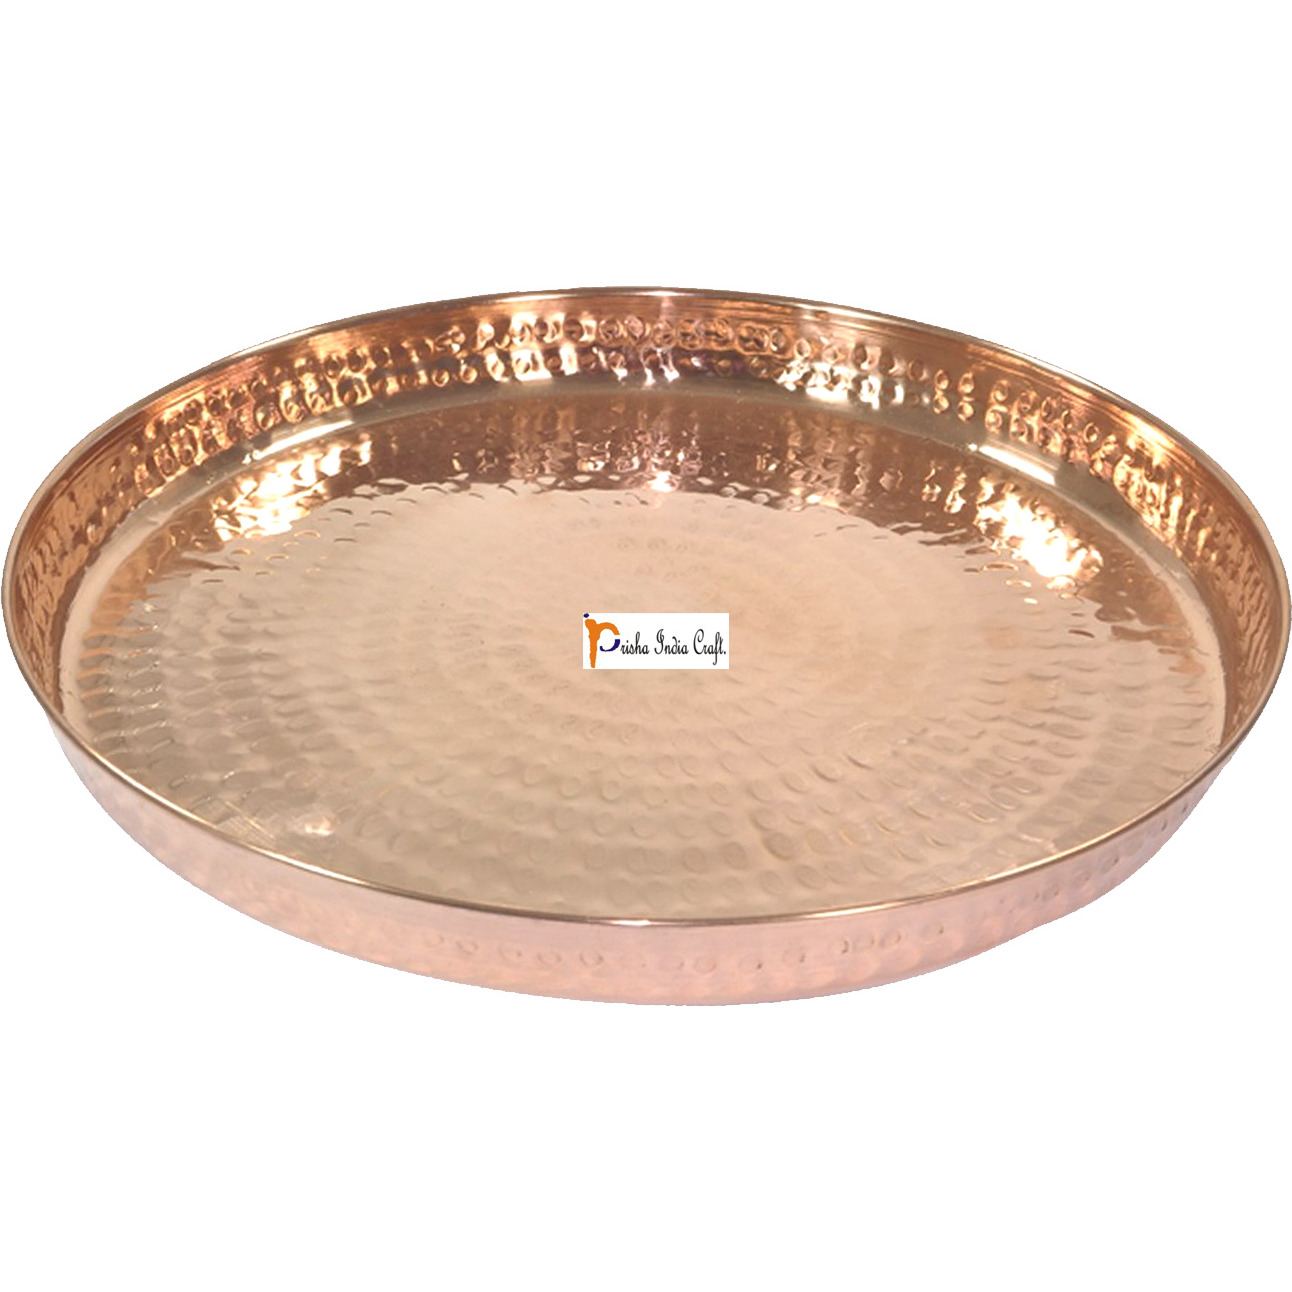 Set of 3 Prisha India Craft B. Handmade Indian Dinnerware Pure Copper Thali Set Dia 12  Traditional Dinner Set of Plate, Bowl, Spoons, Glass with Napkin ring and Coaster - Christmas Gift